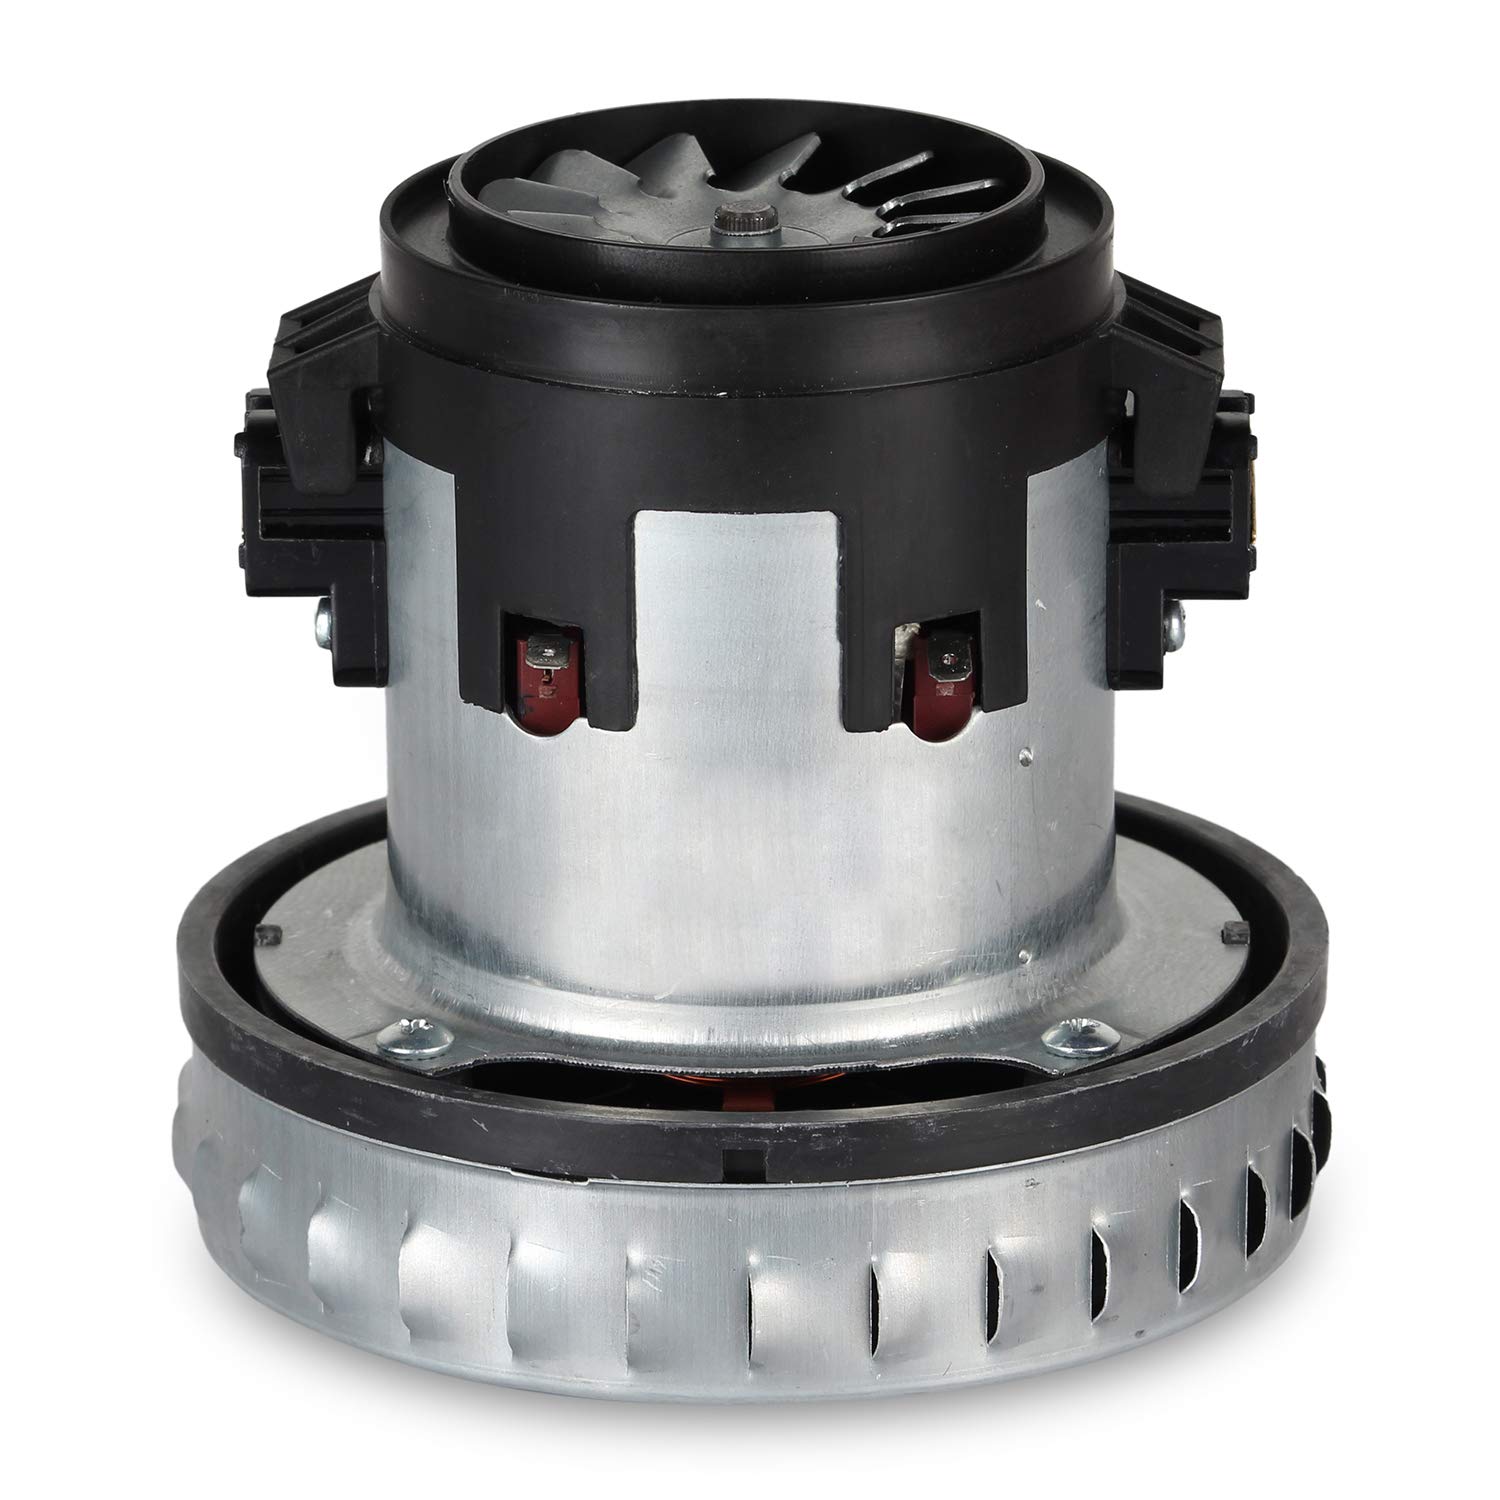 Replacement motor for VCD21 and VCD15 - American Micronic India